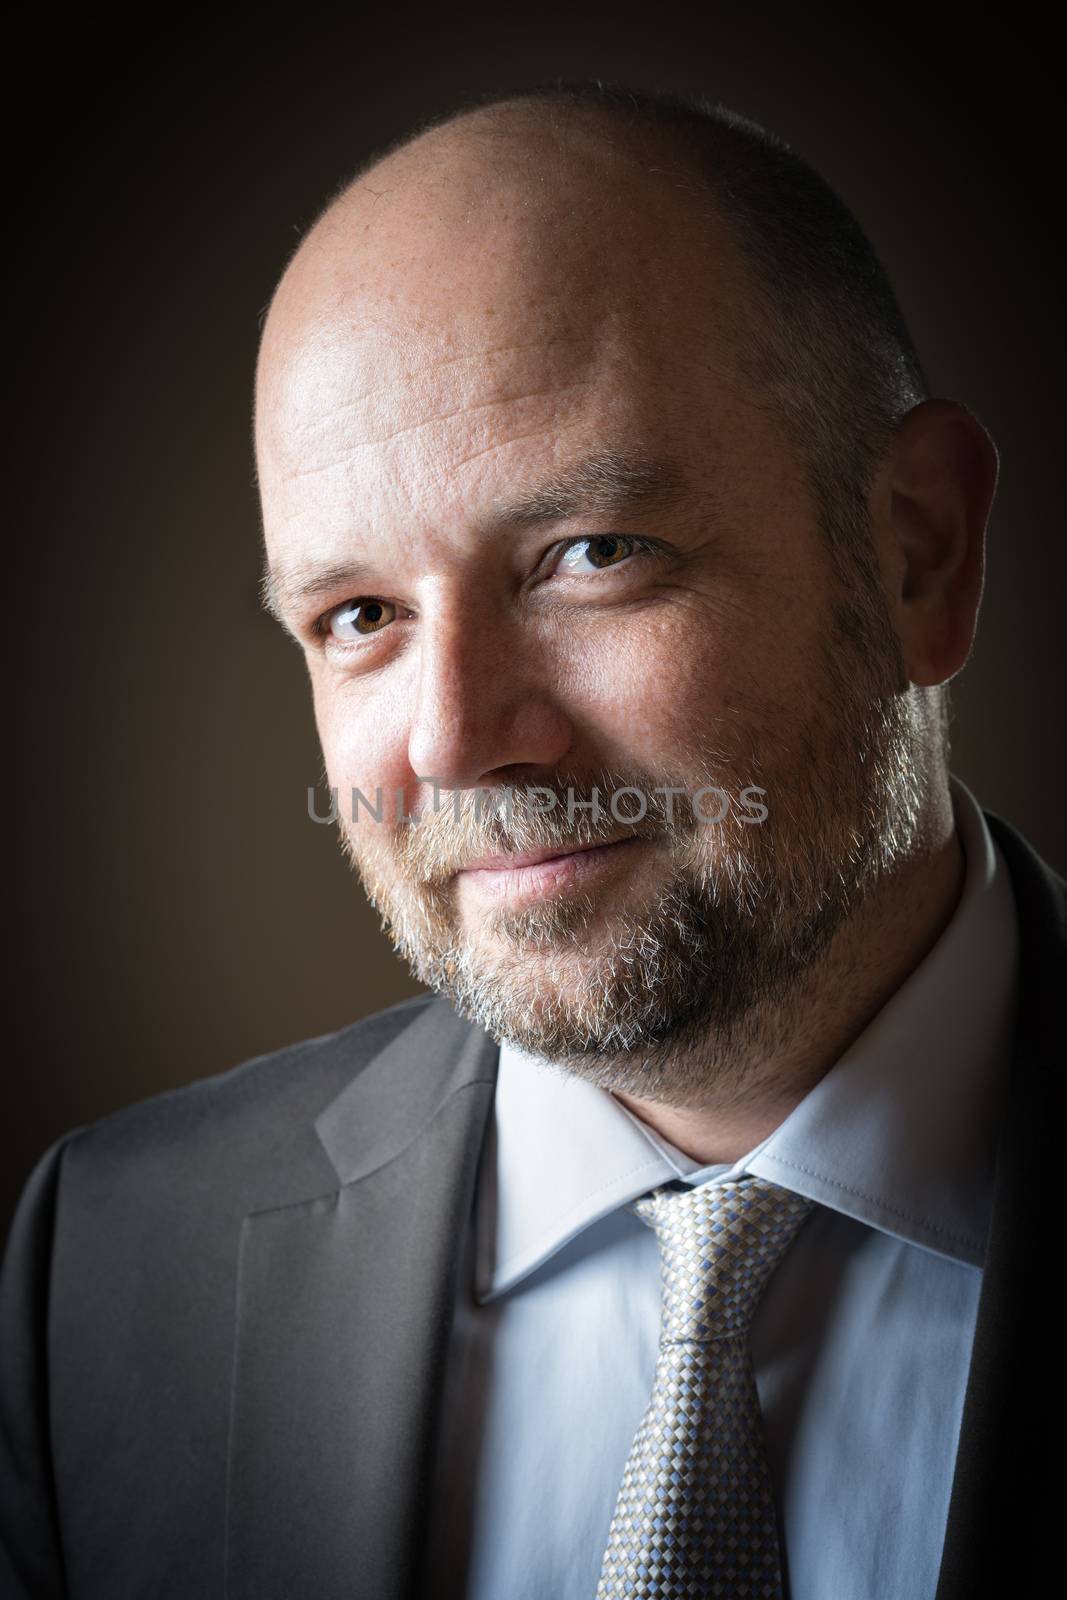 Pleasant business man with beard and bald head against a dark background